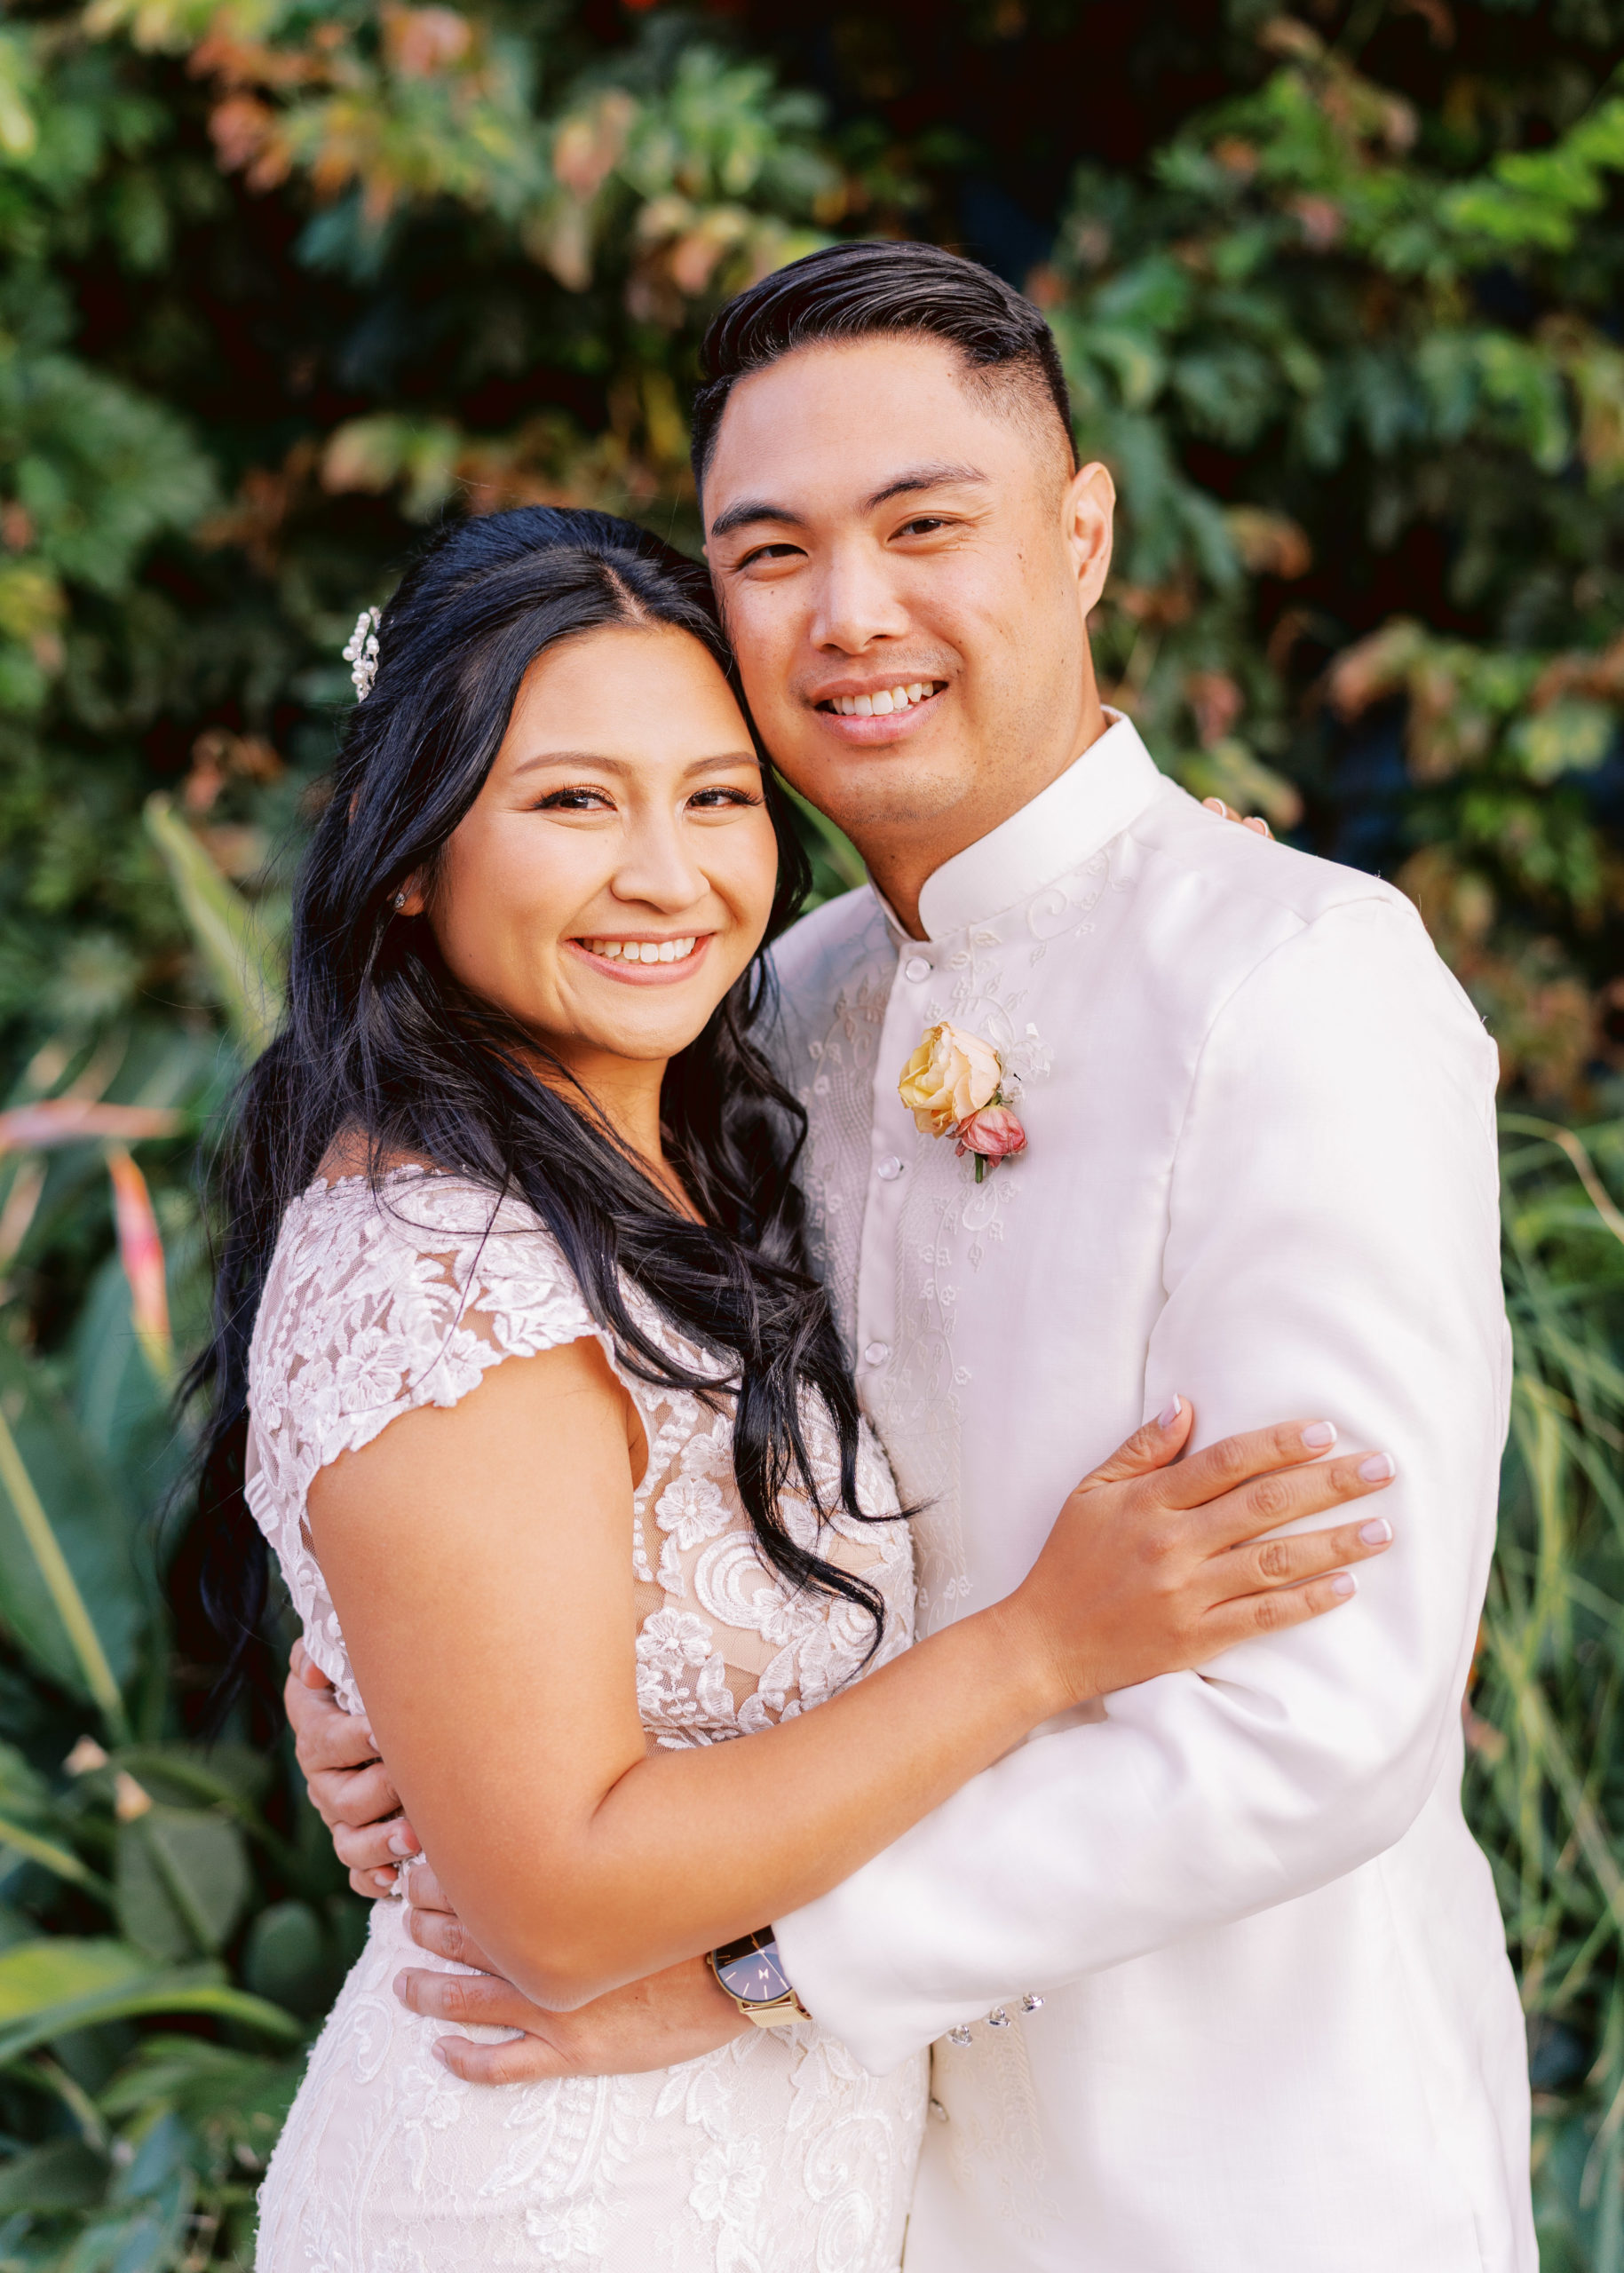 bride and groom pose in front of greenery in DTLA